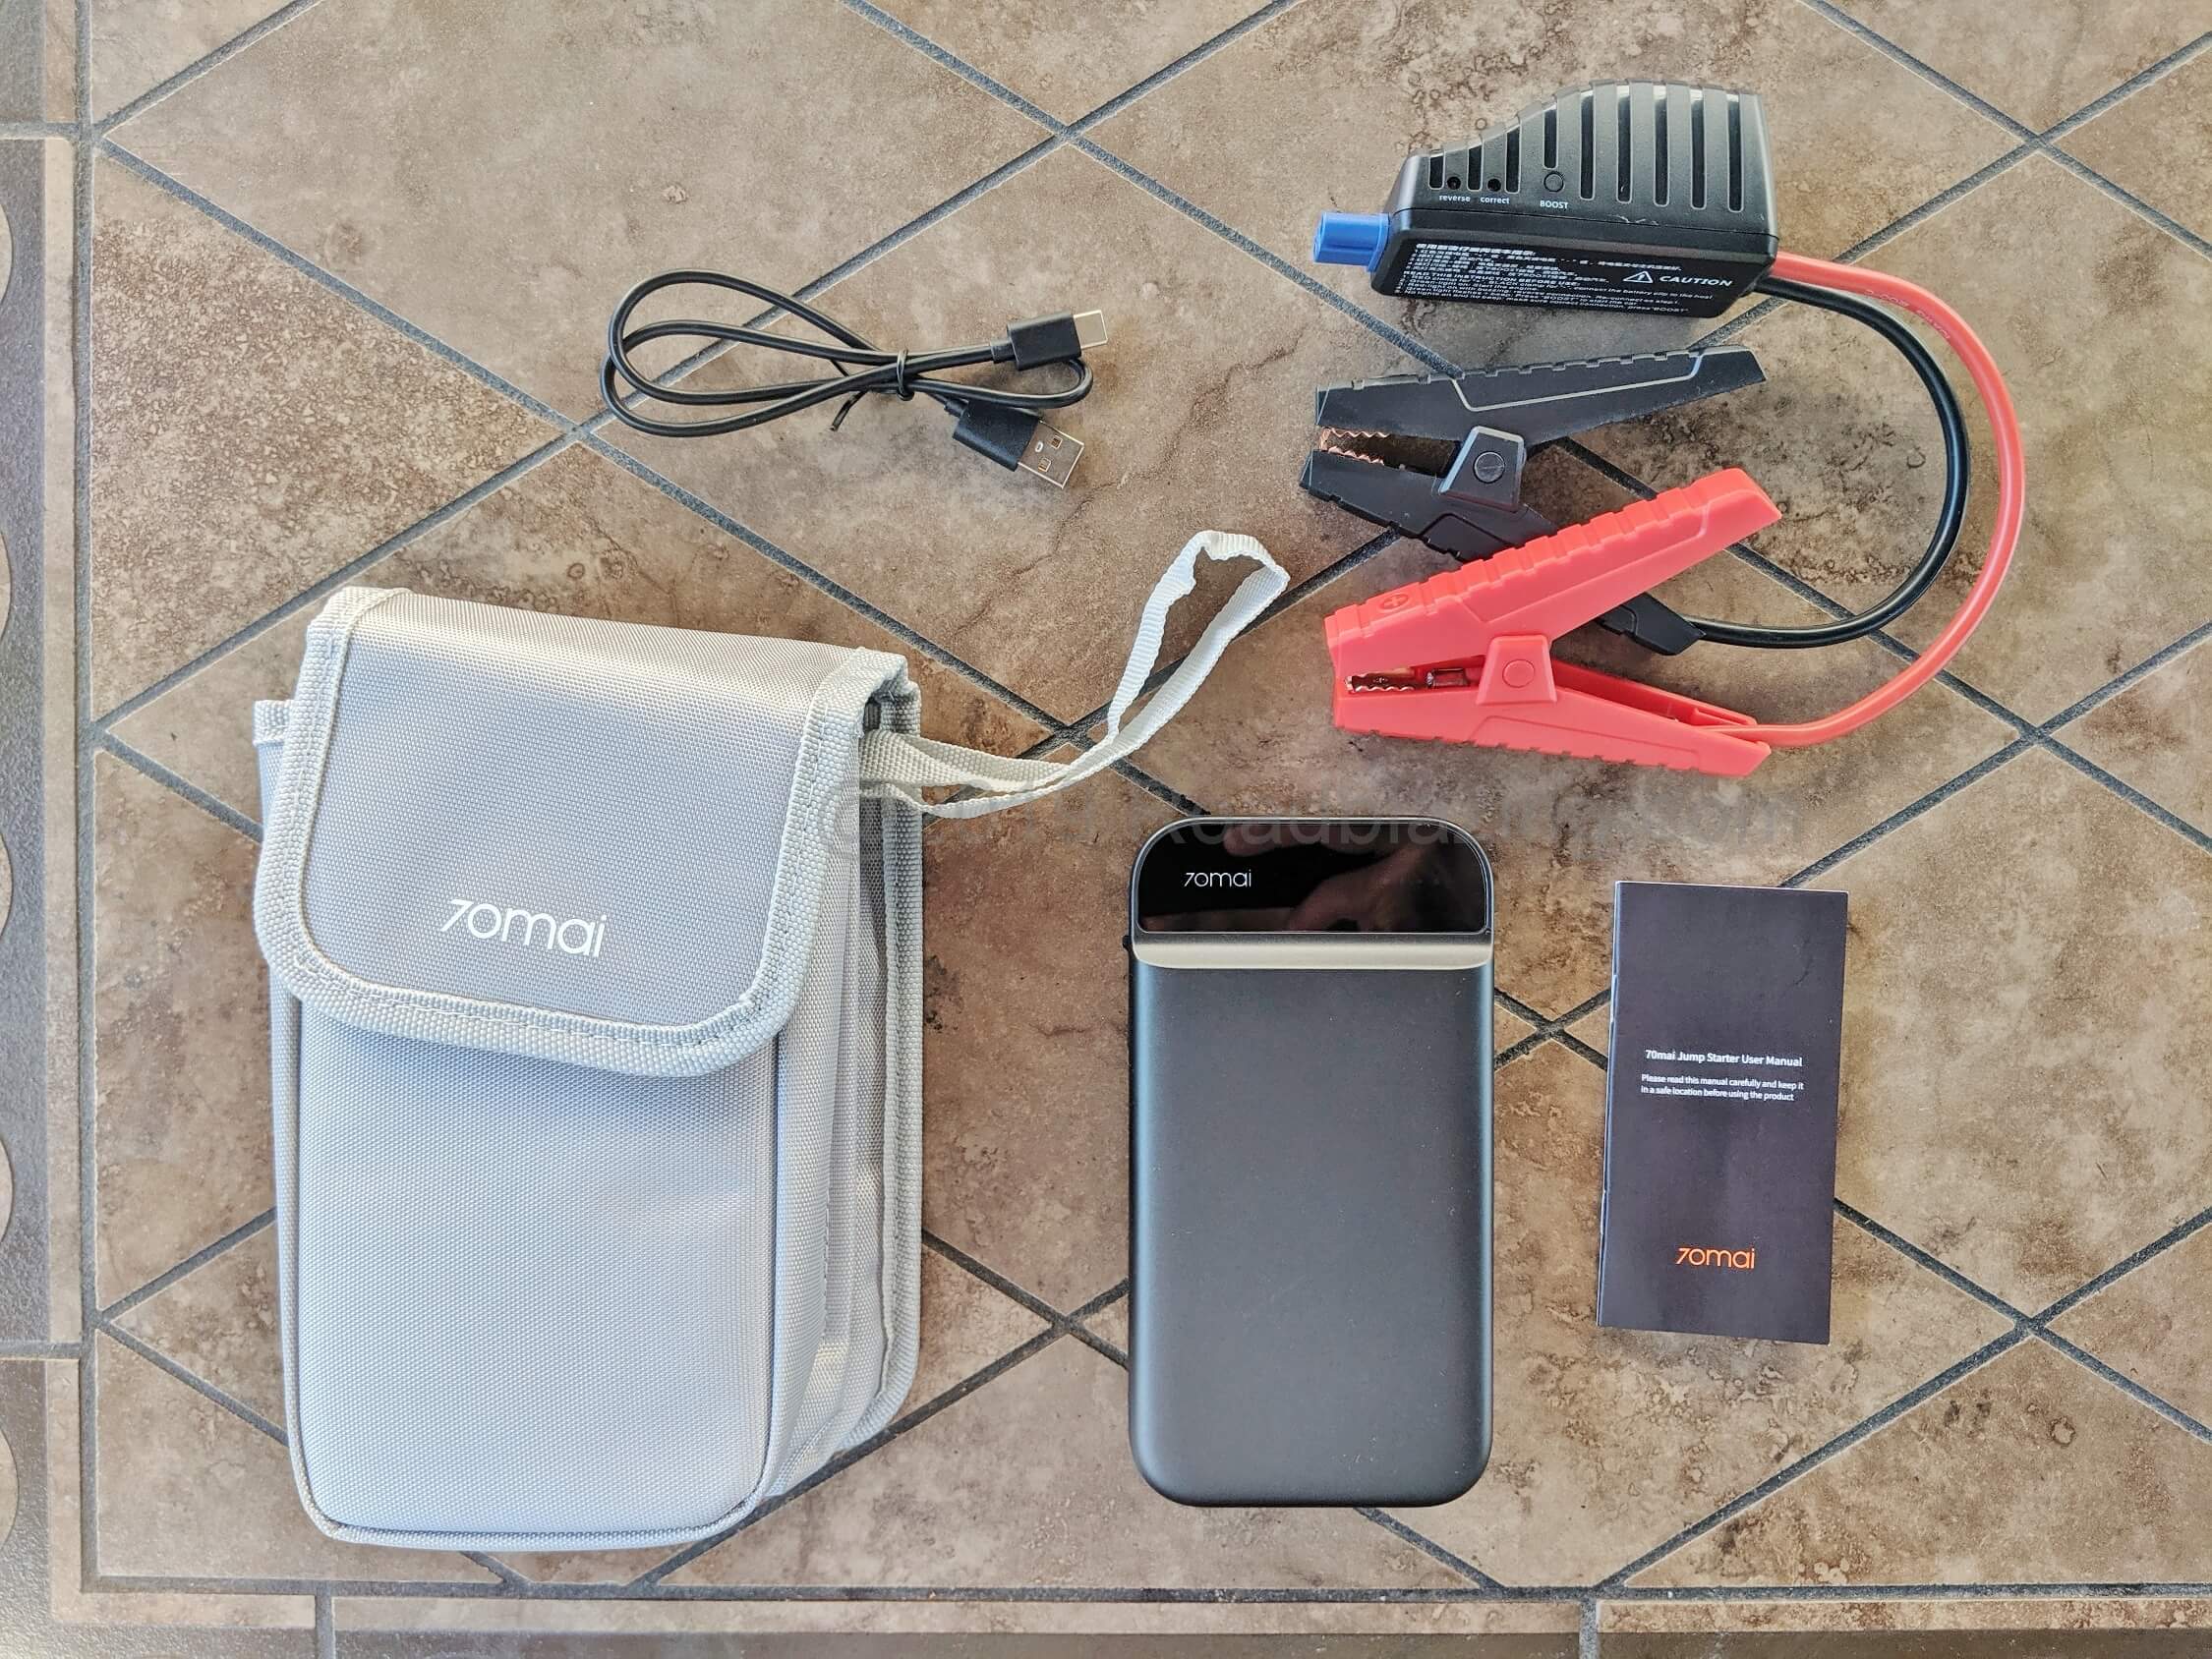 70mai Jump Starter: out of box with cables and carry pouch